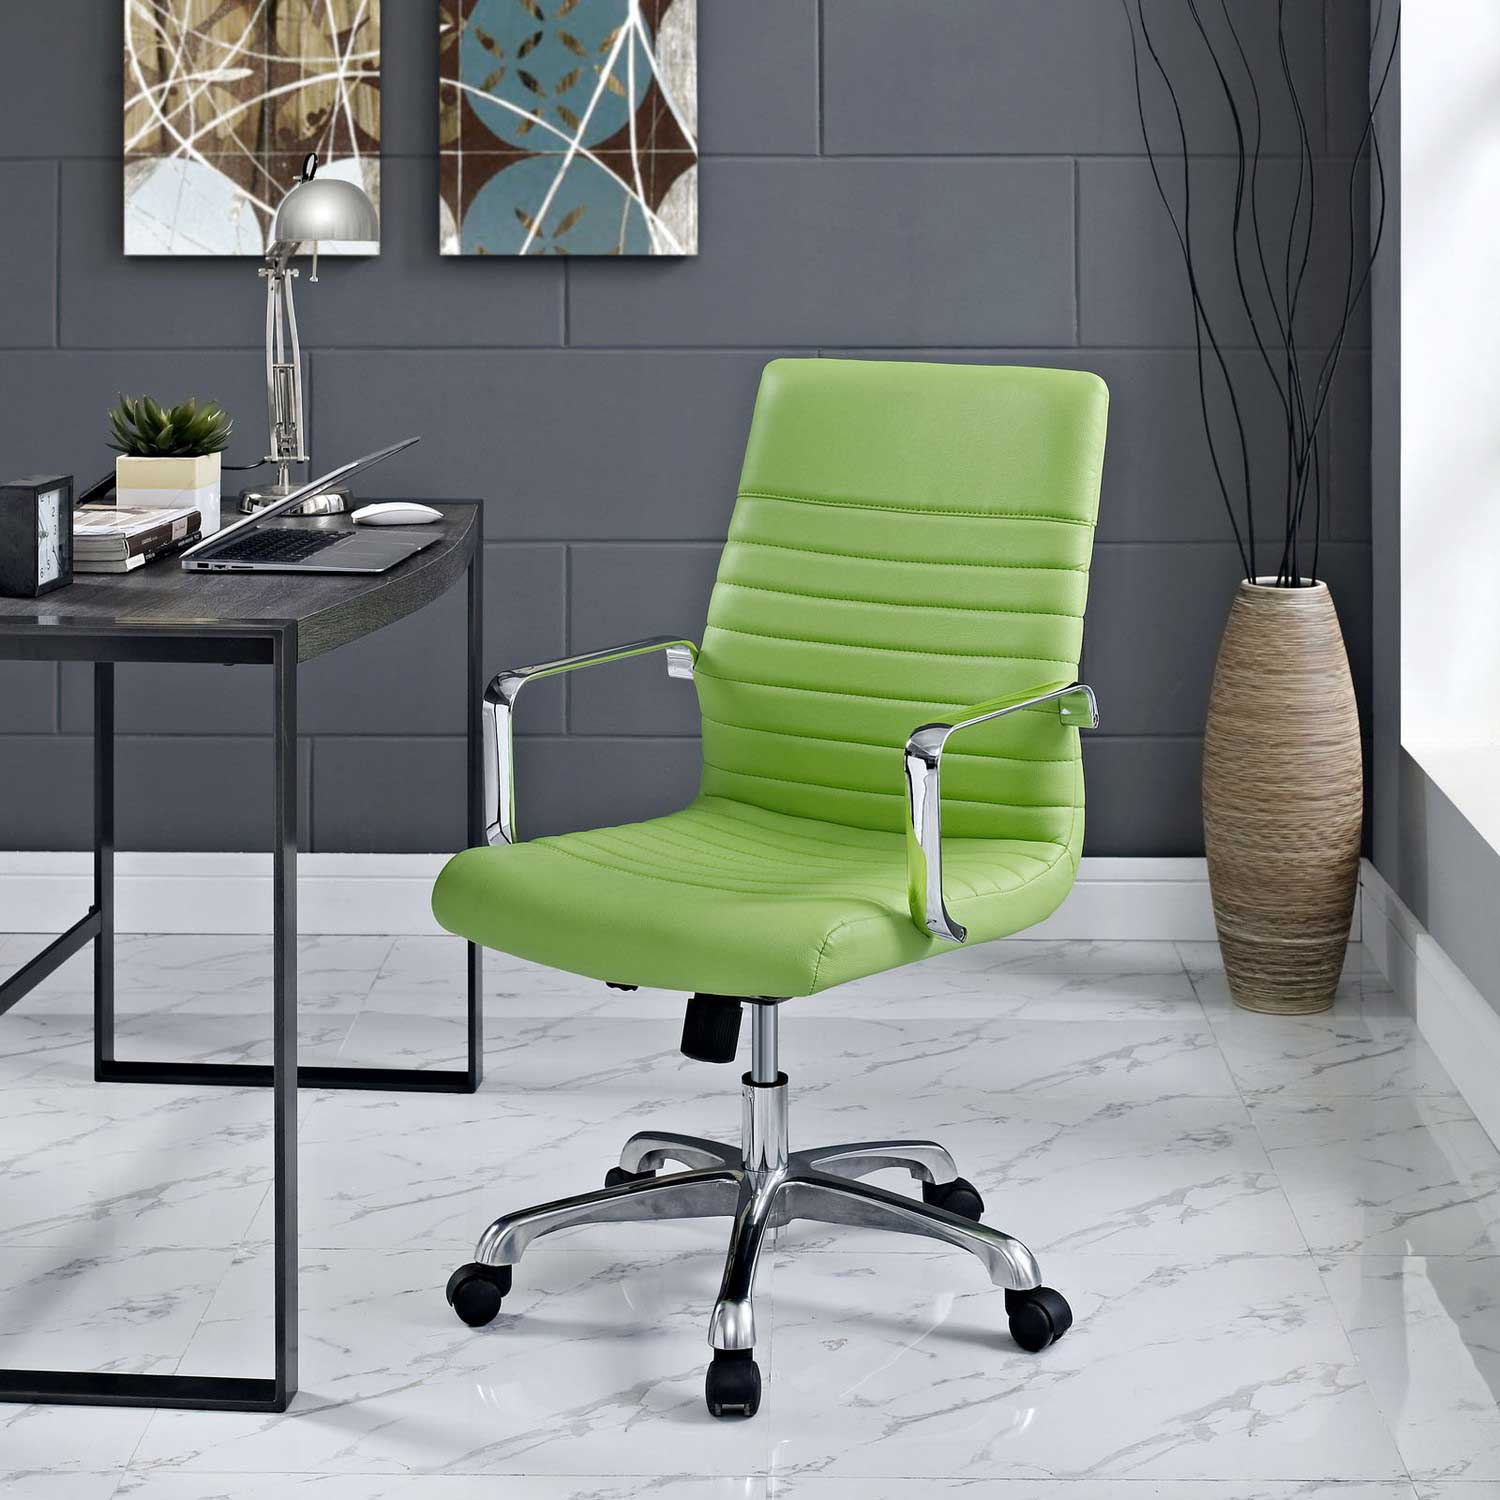 Modway Finesse Mid Back Office Chair - Bright Green